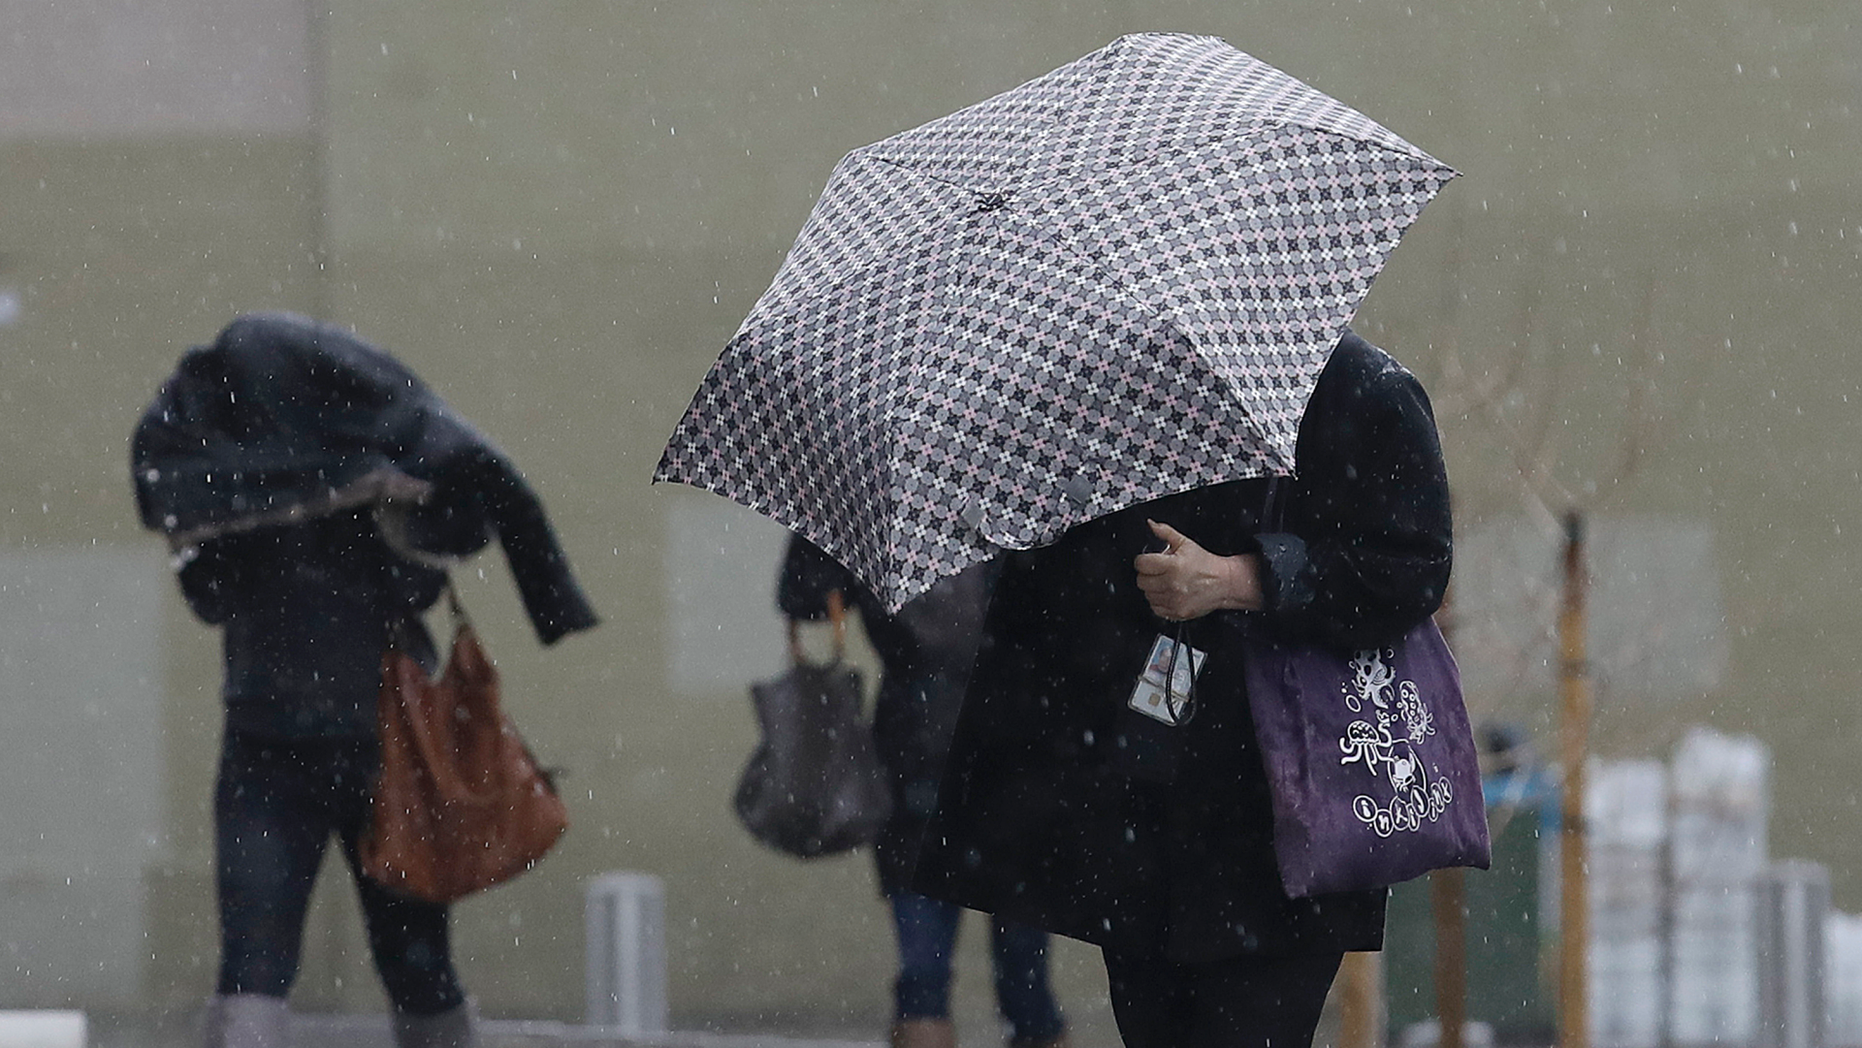 Women walk in the rain towards a federal court building in San Francisco on Monday, February 25, 2019. A violent winter storm will blow beyond 160 km / h and should make up to 2 , 4 meters Snow accumulated Monday in the Sierra Nevada on the west coast, overturning trucks, causing power outages and temporarily closing the main road near Reno. (AP Photo / Jeff Chiu)